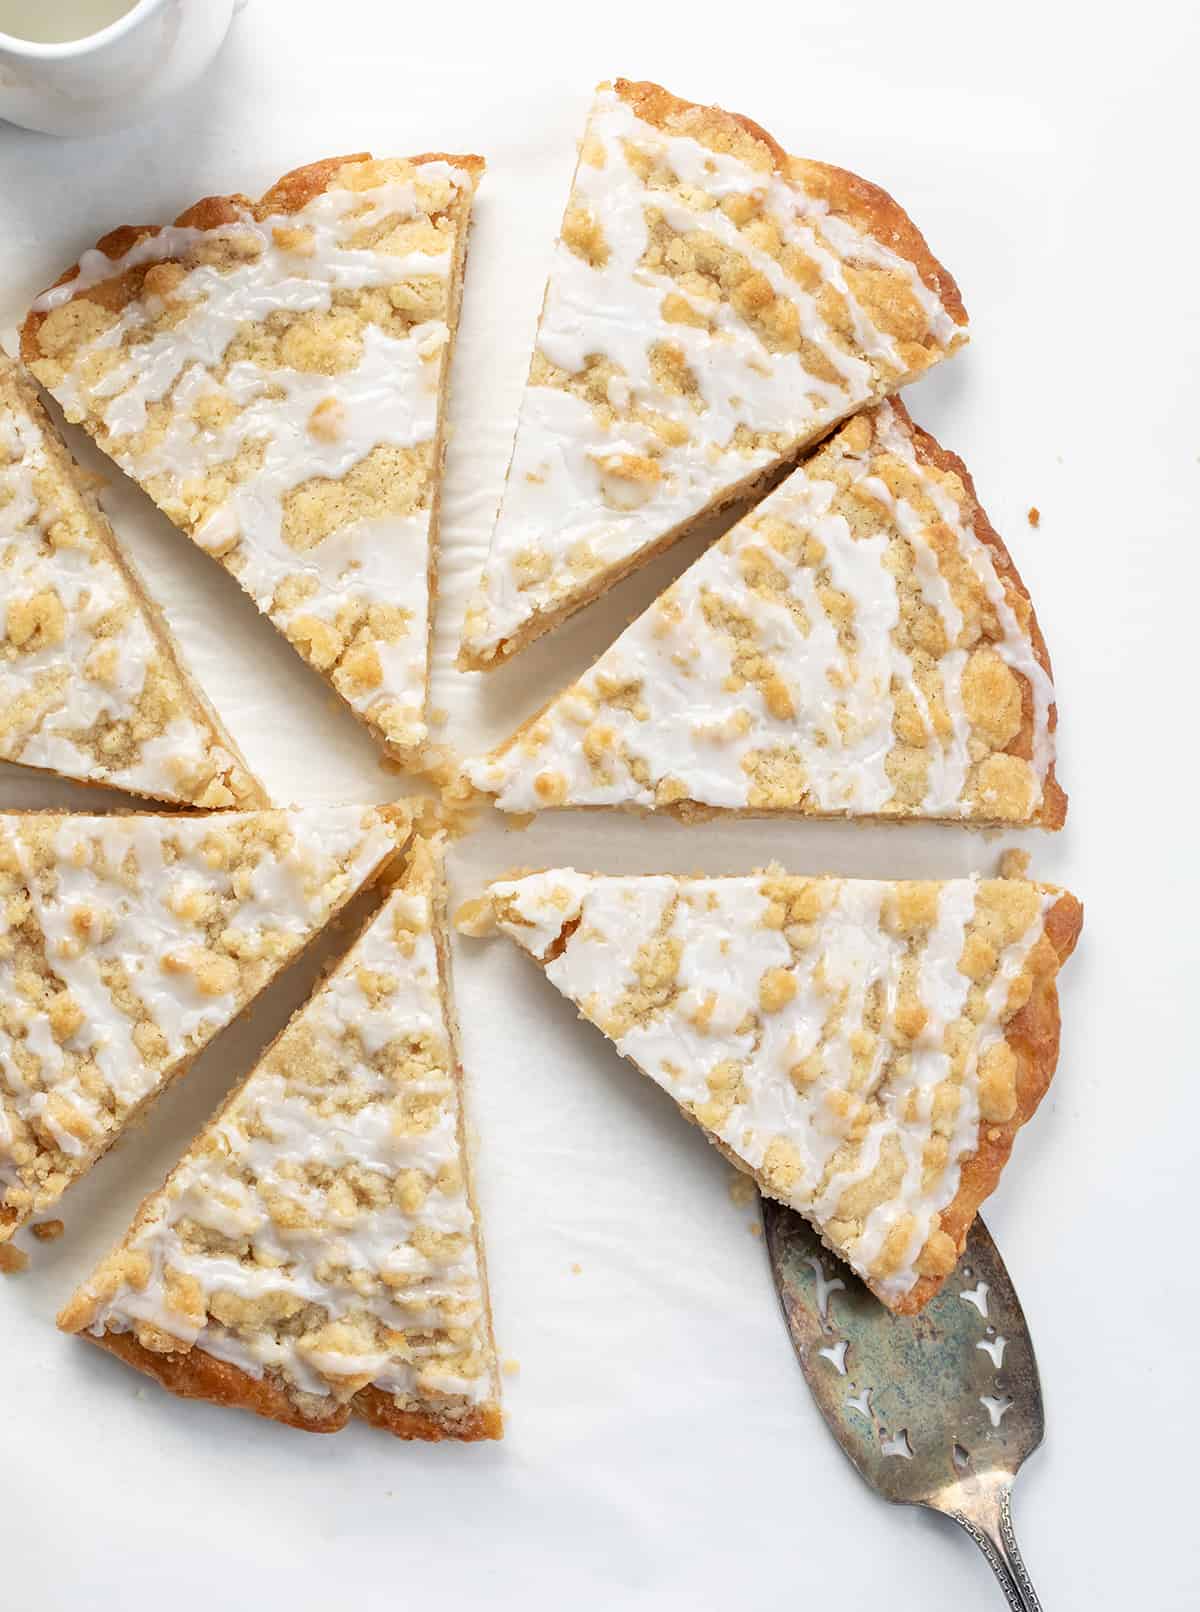 Dessert Pizza (Copycat Cactus Bread) Cut Into Pieces and Separated with One Being Removed with a Utensil.